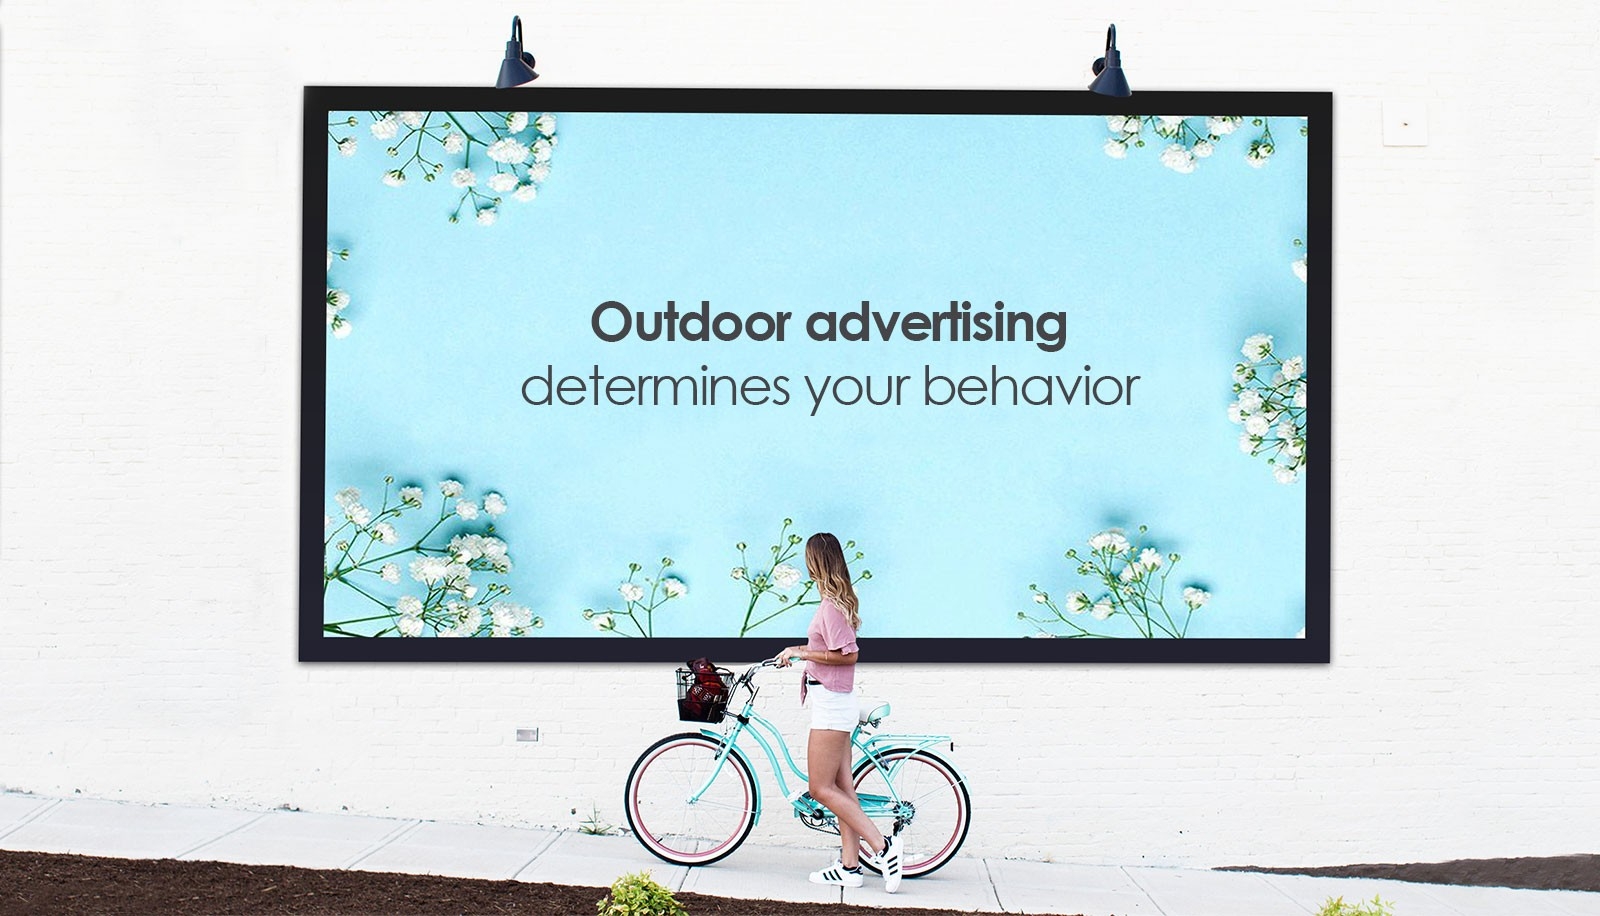 Outdoor advertising determines your, my and our behavior *